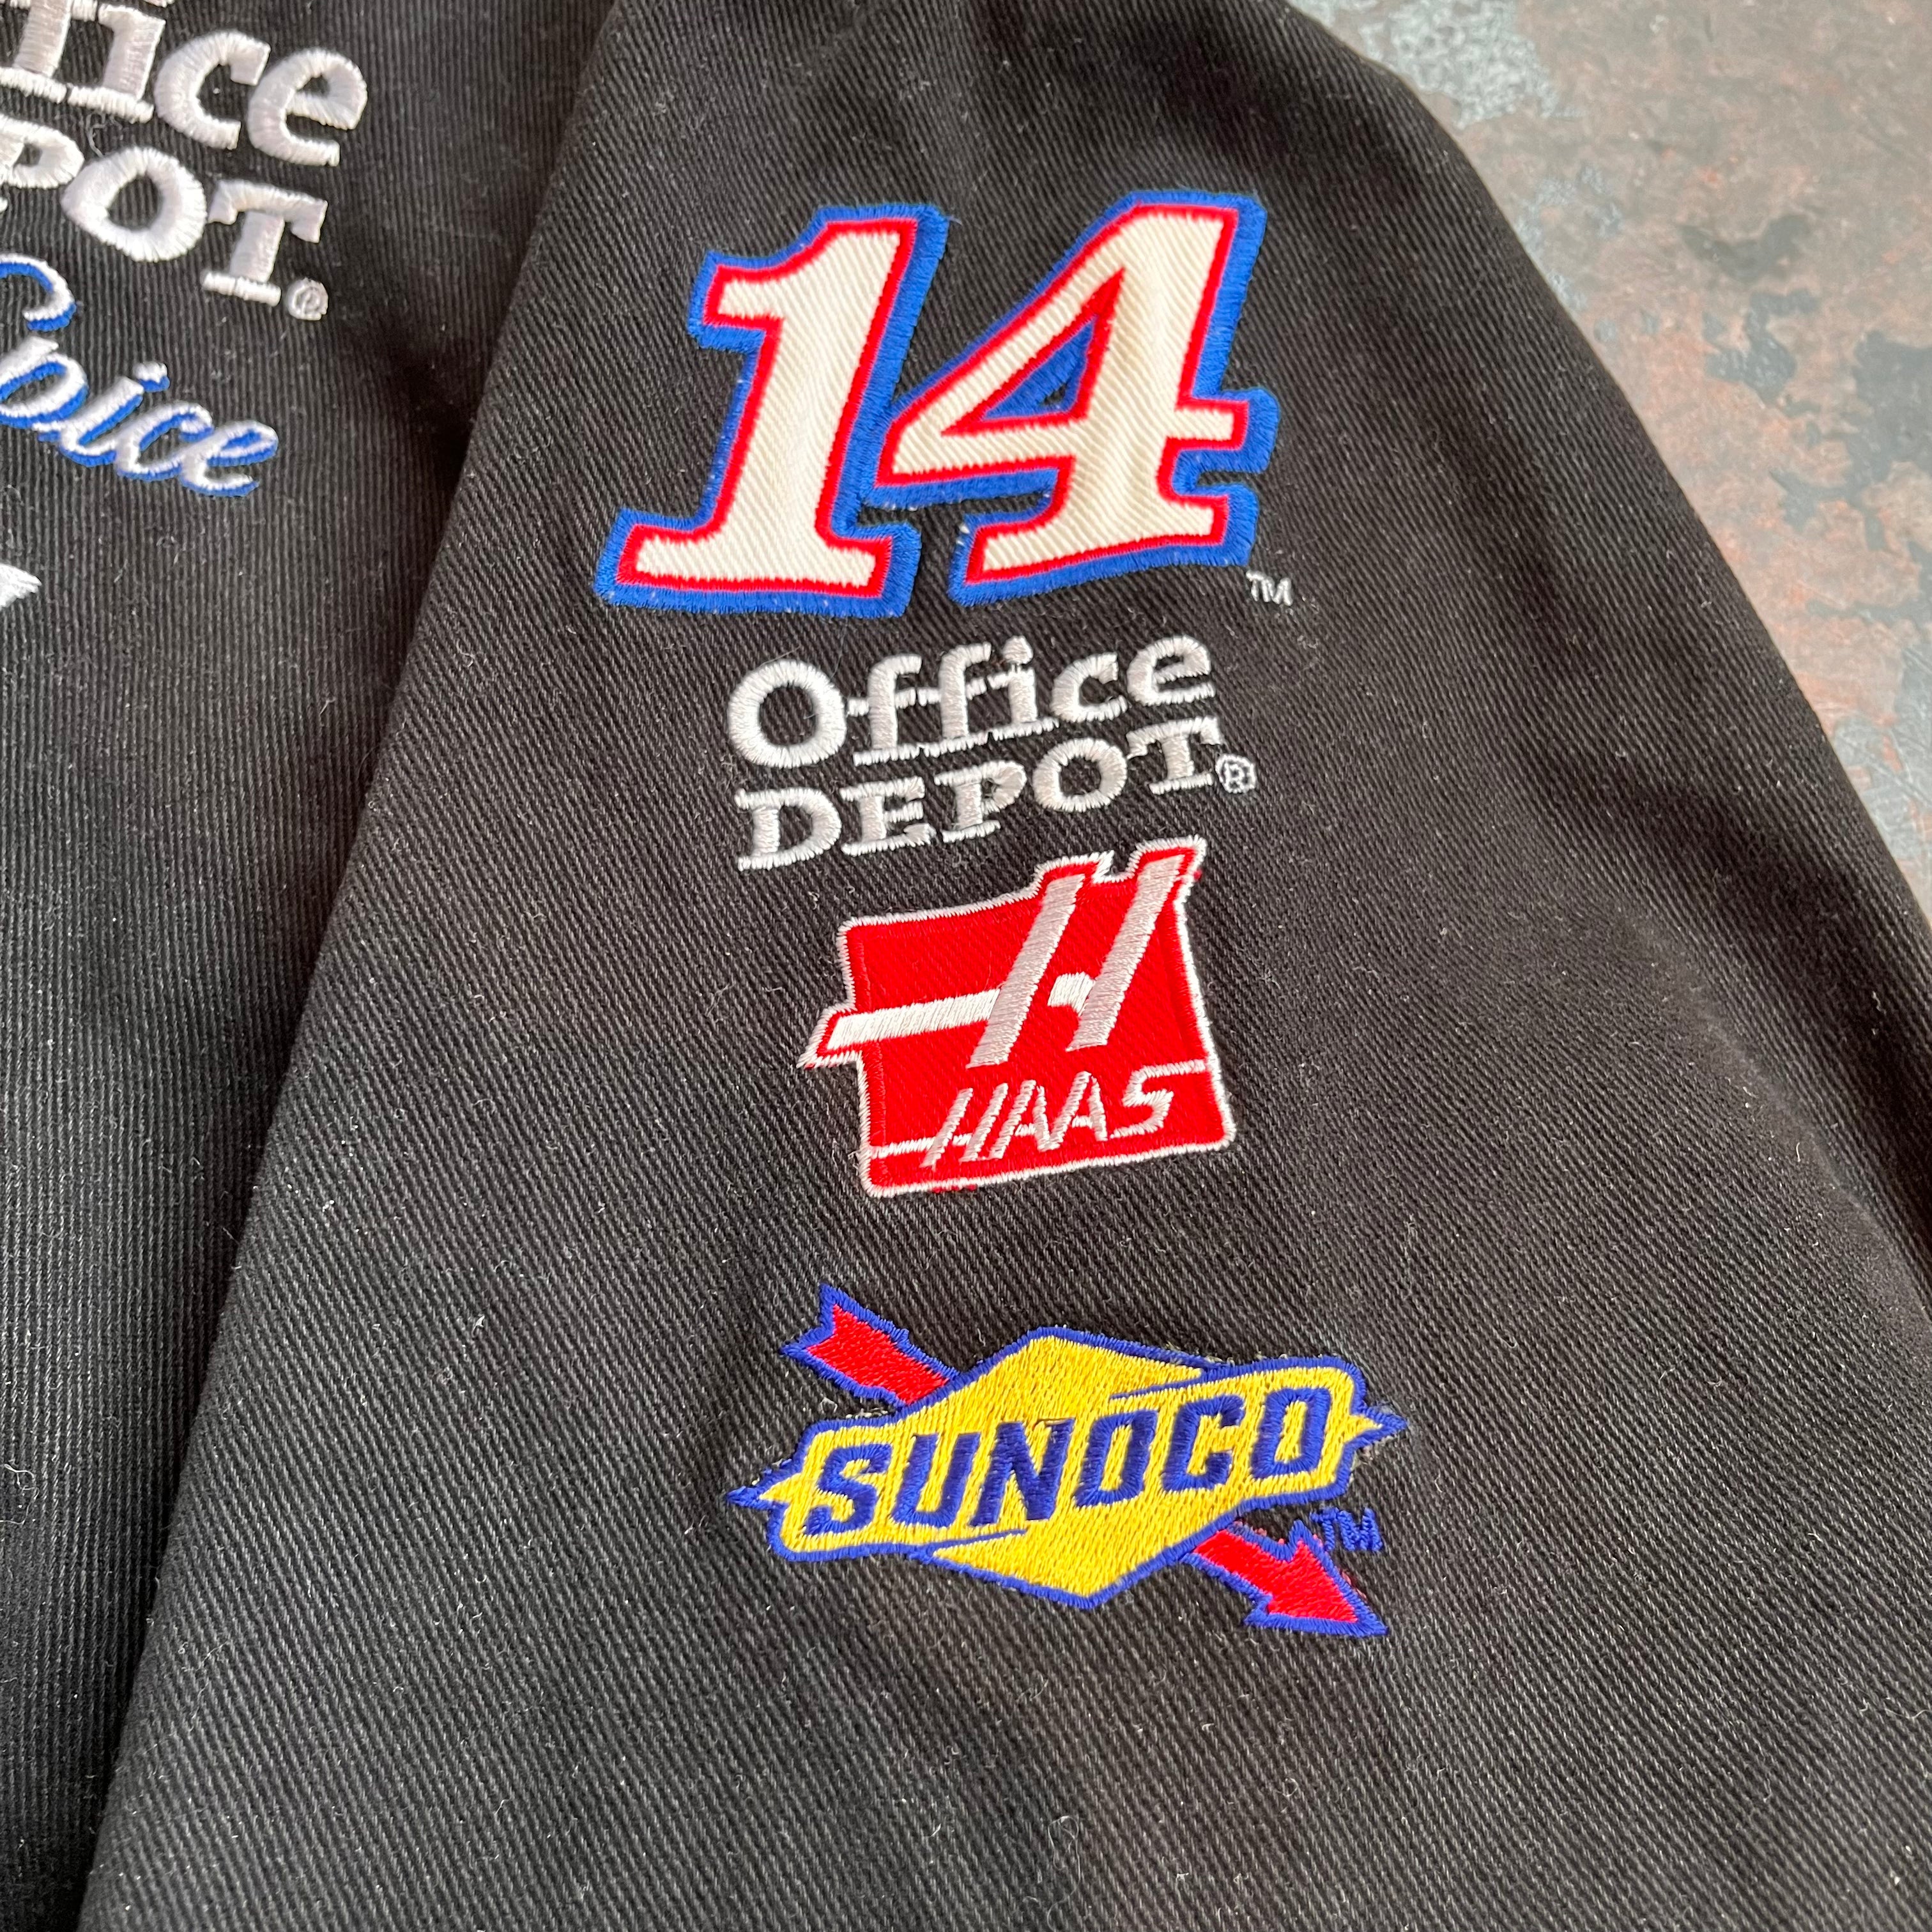 Old Spice Racing Jacket